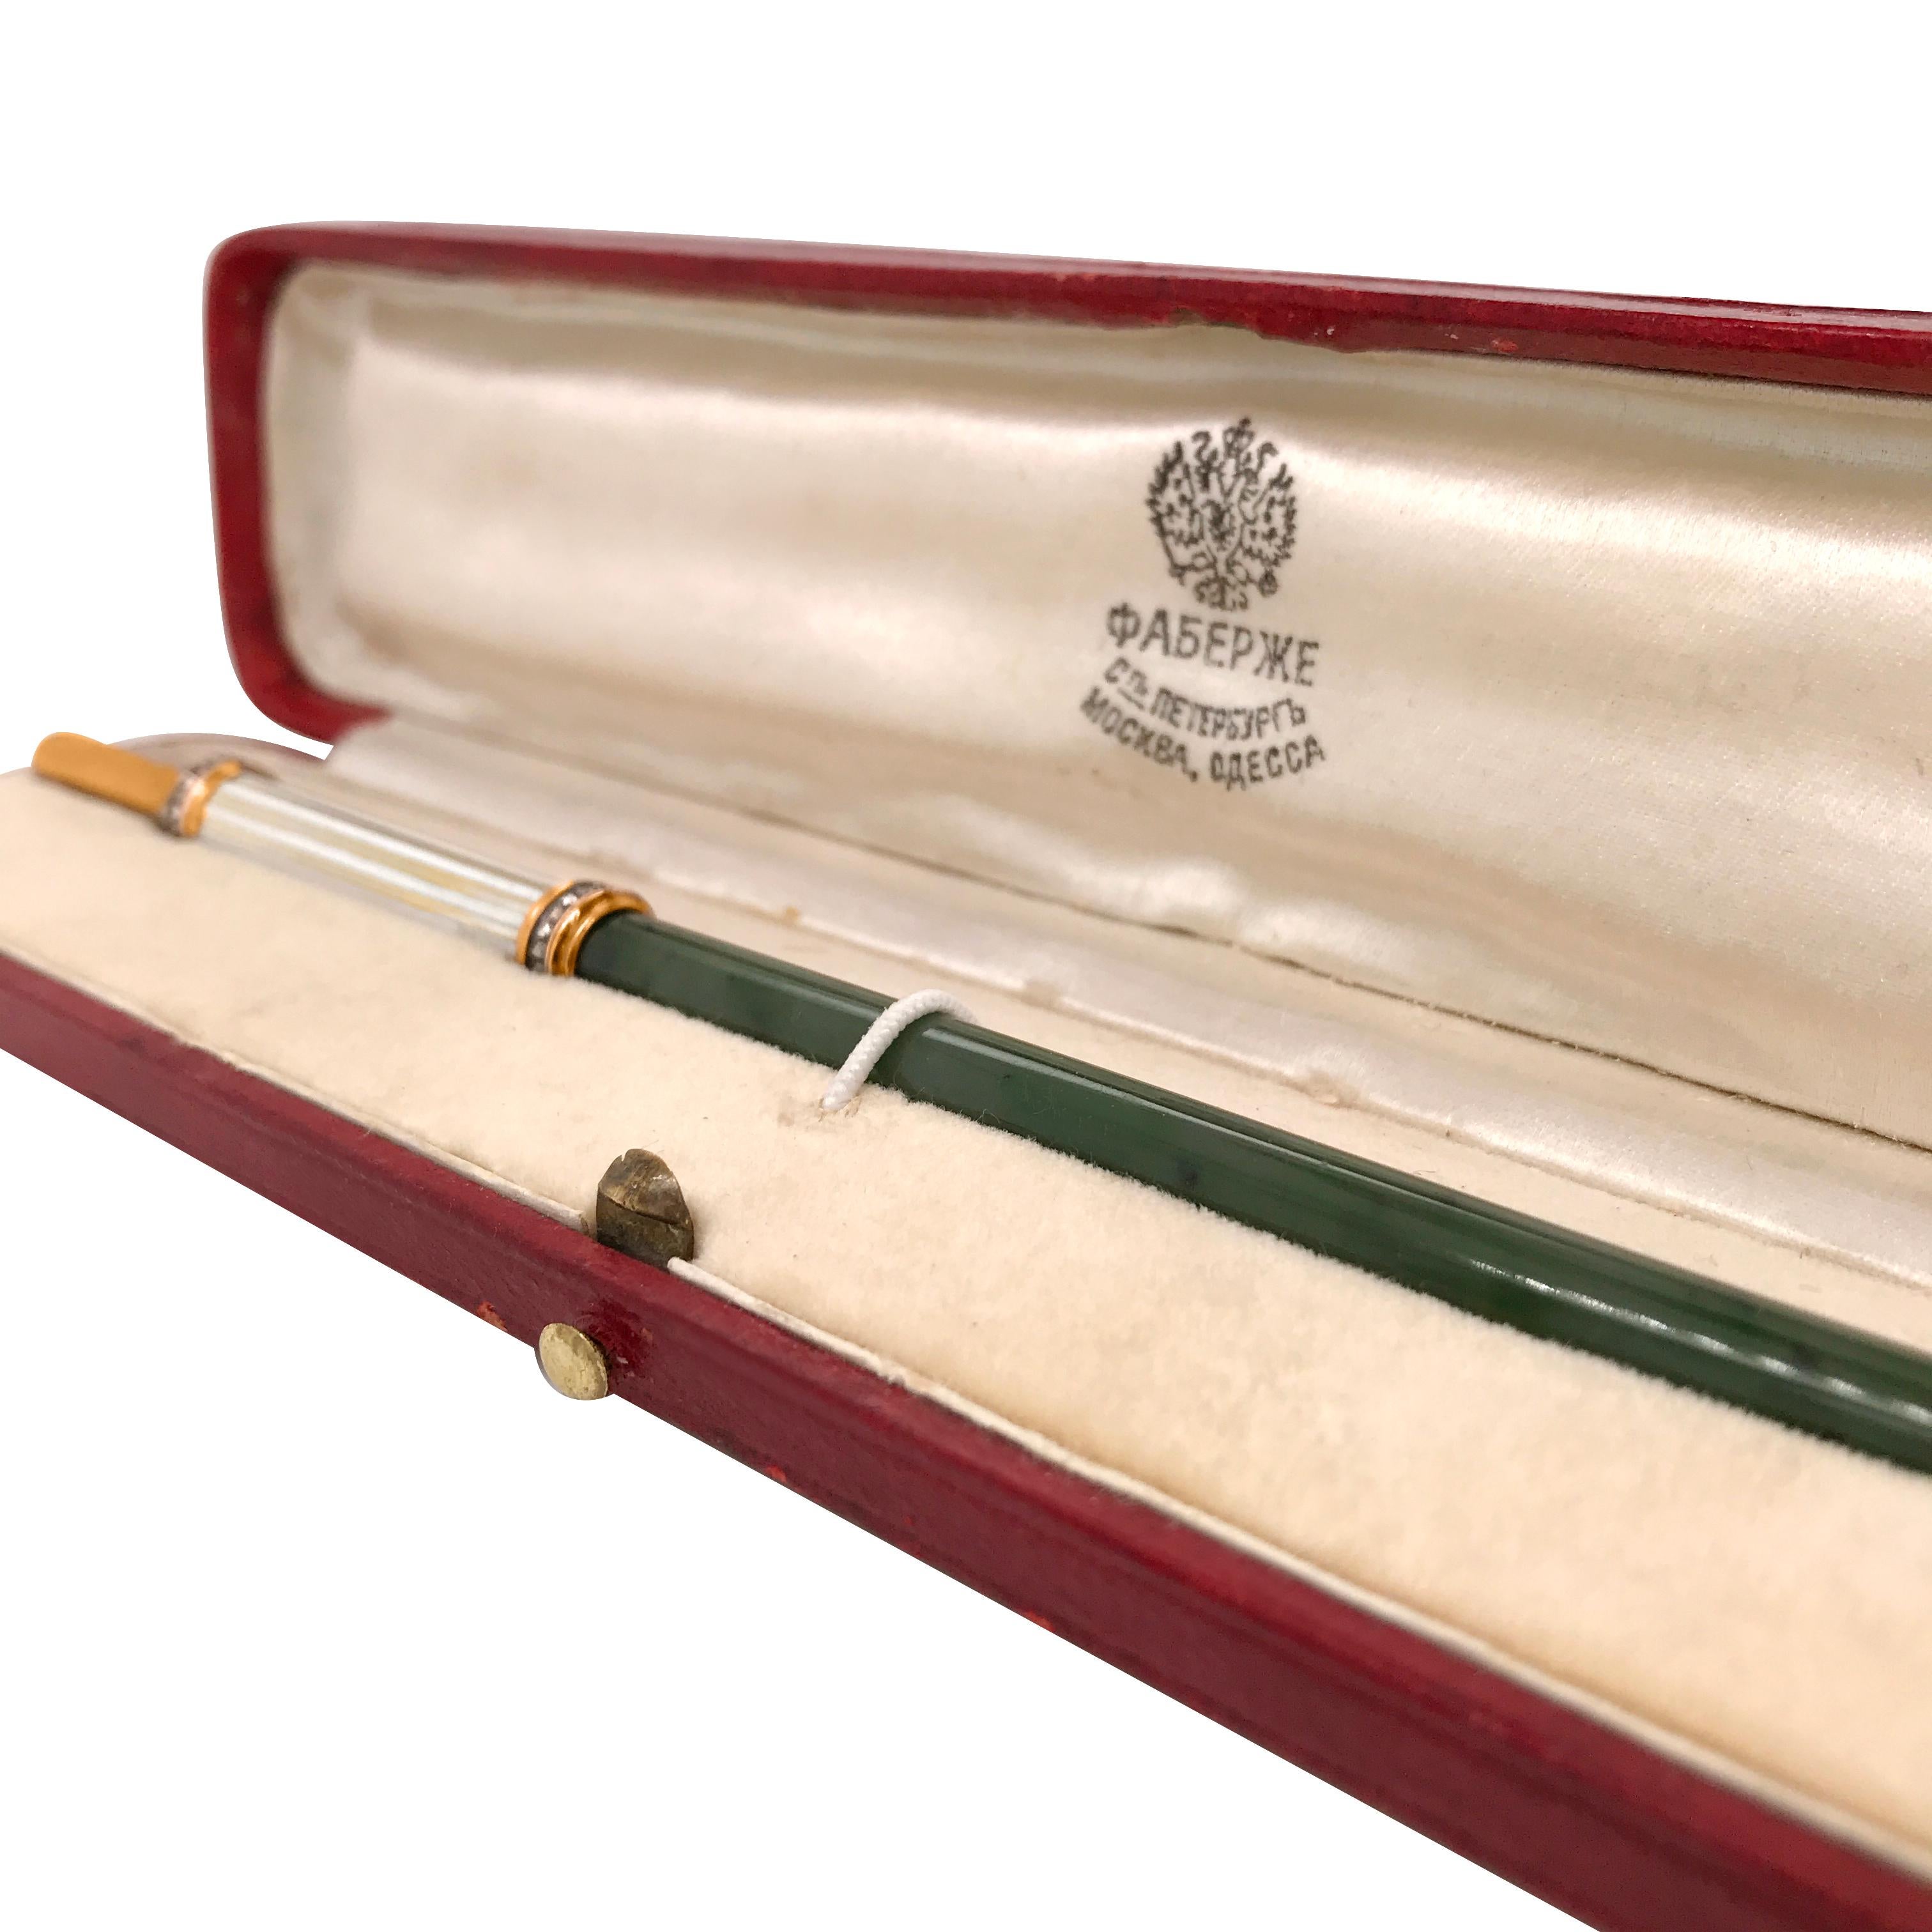 This authentic jade, diamond and enamel Faberge dip pen is rendered in 14K yellow gold, made by Henrik Wigstrom (1862-1923). The handle is adorned with white and golden enameled and the body is crafted in jade. Further enhanced by 42 rose-cut